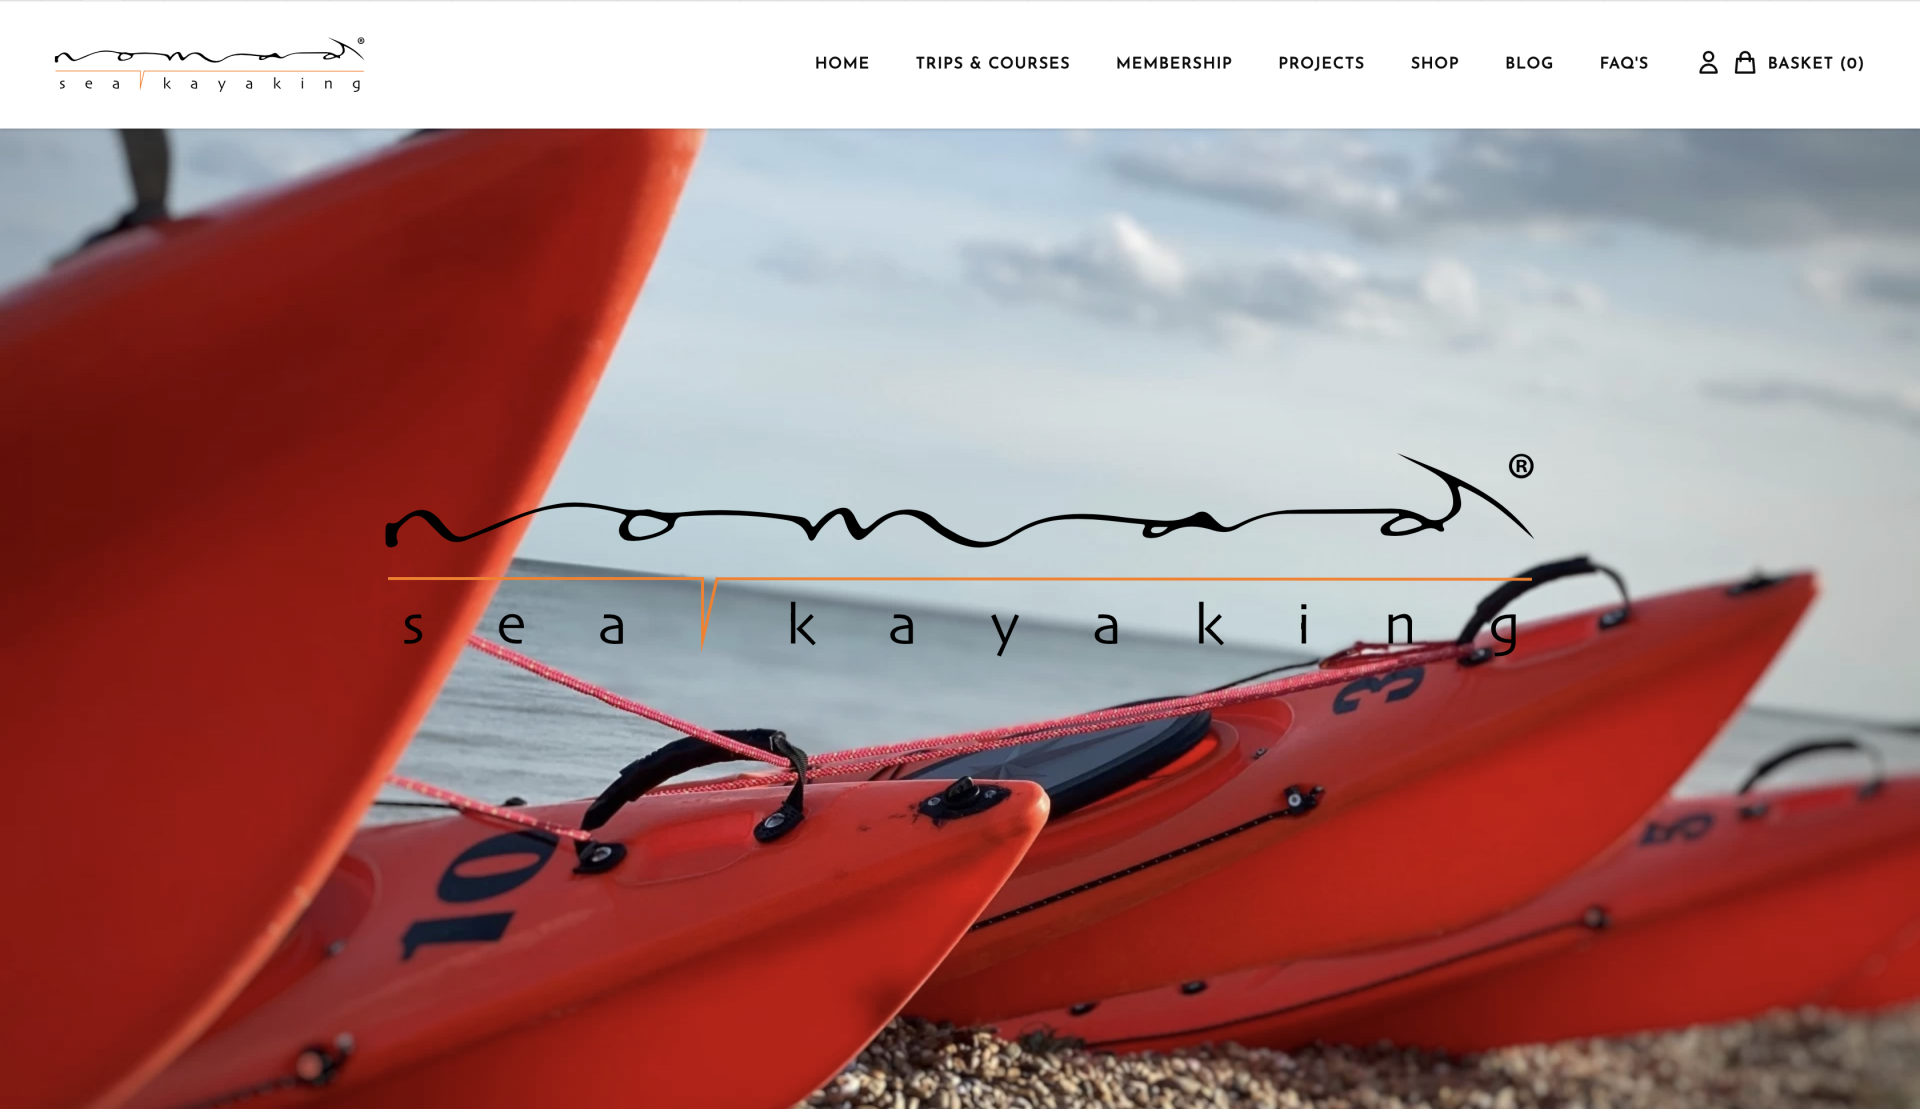 /storage/Home page of the new web site showing matching orange kayaks lined up on a shingle beach with blue skies in the background.